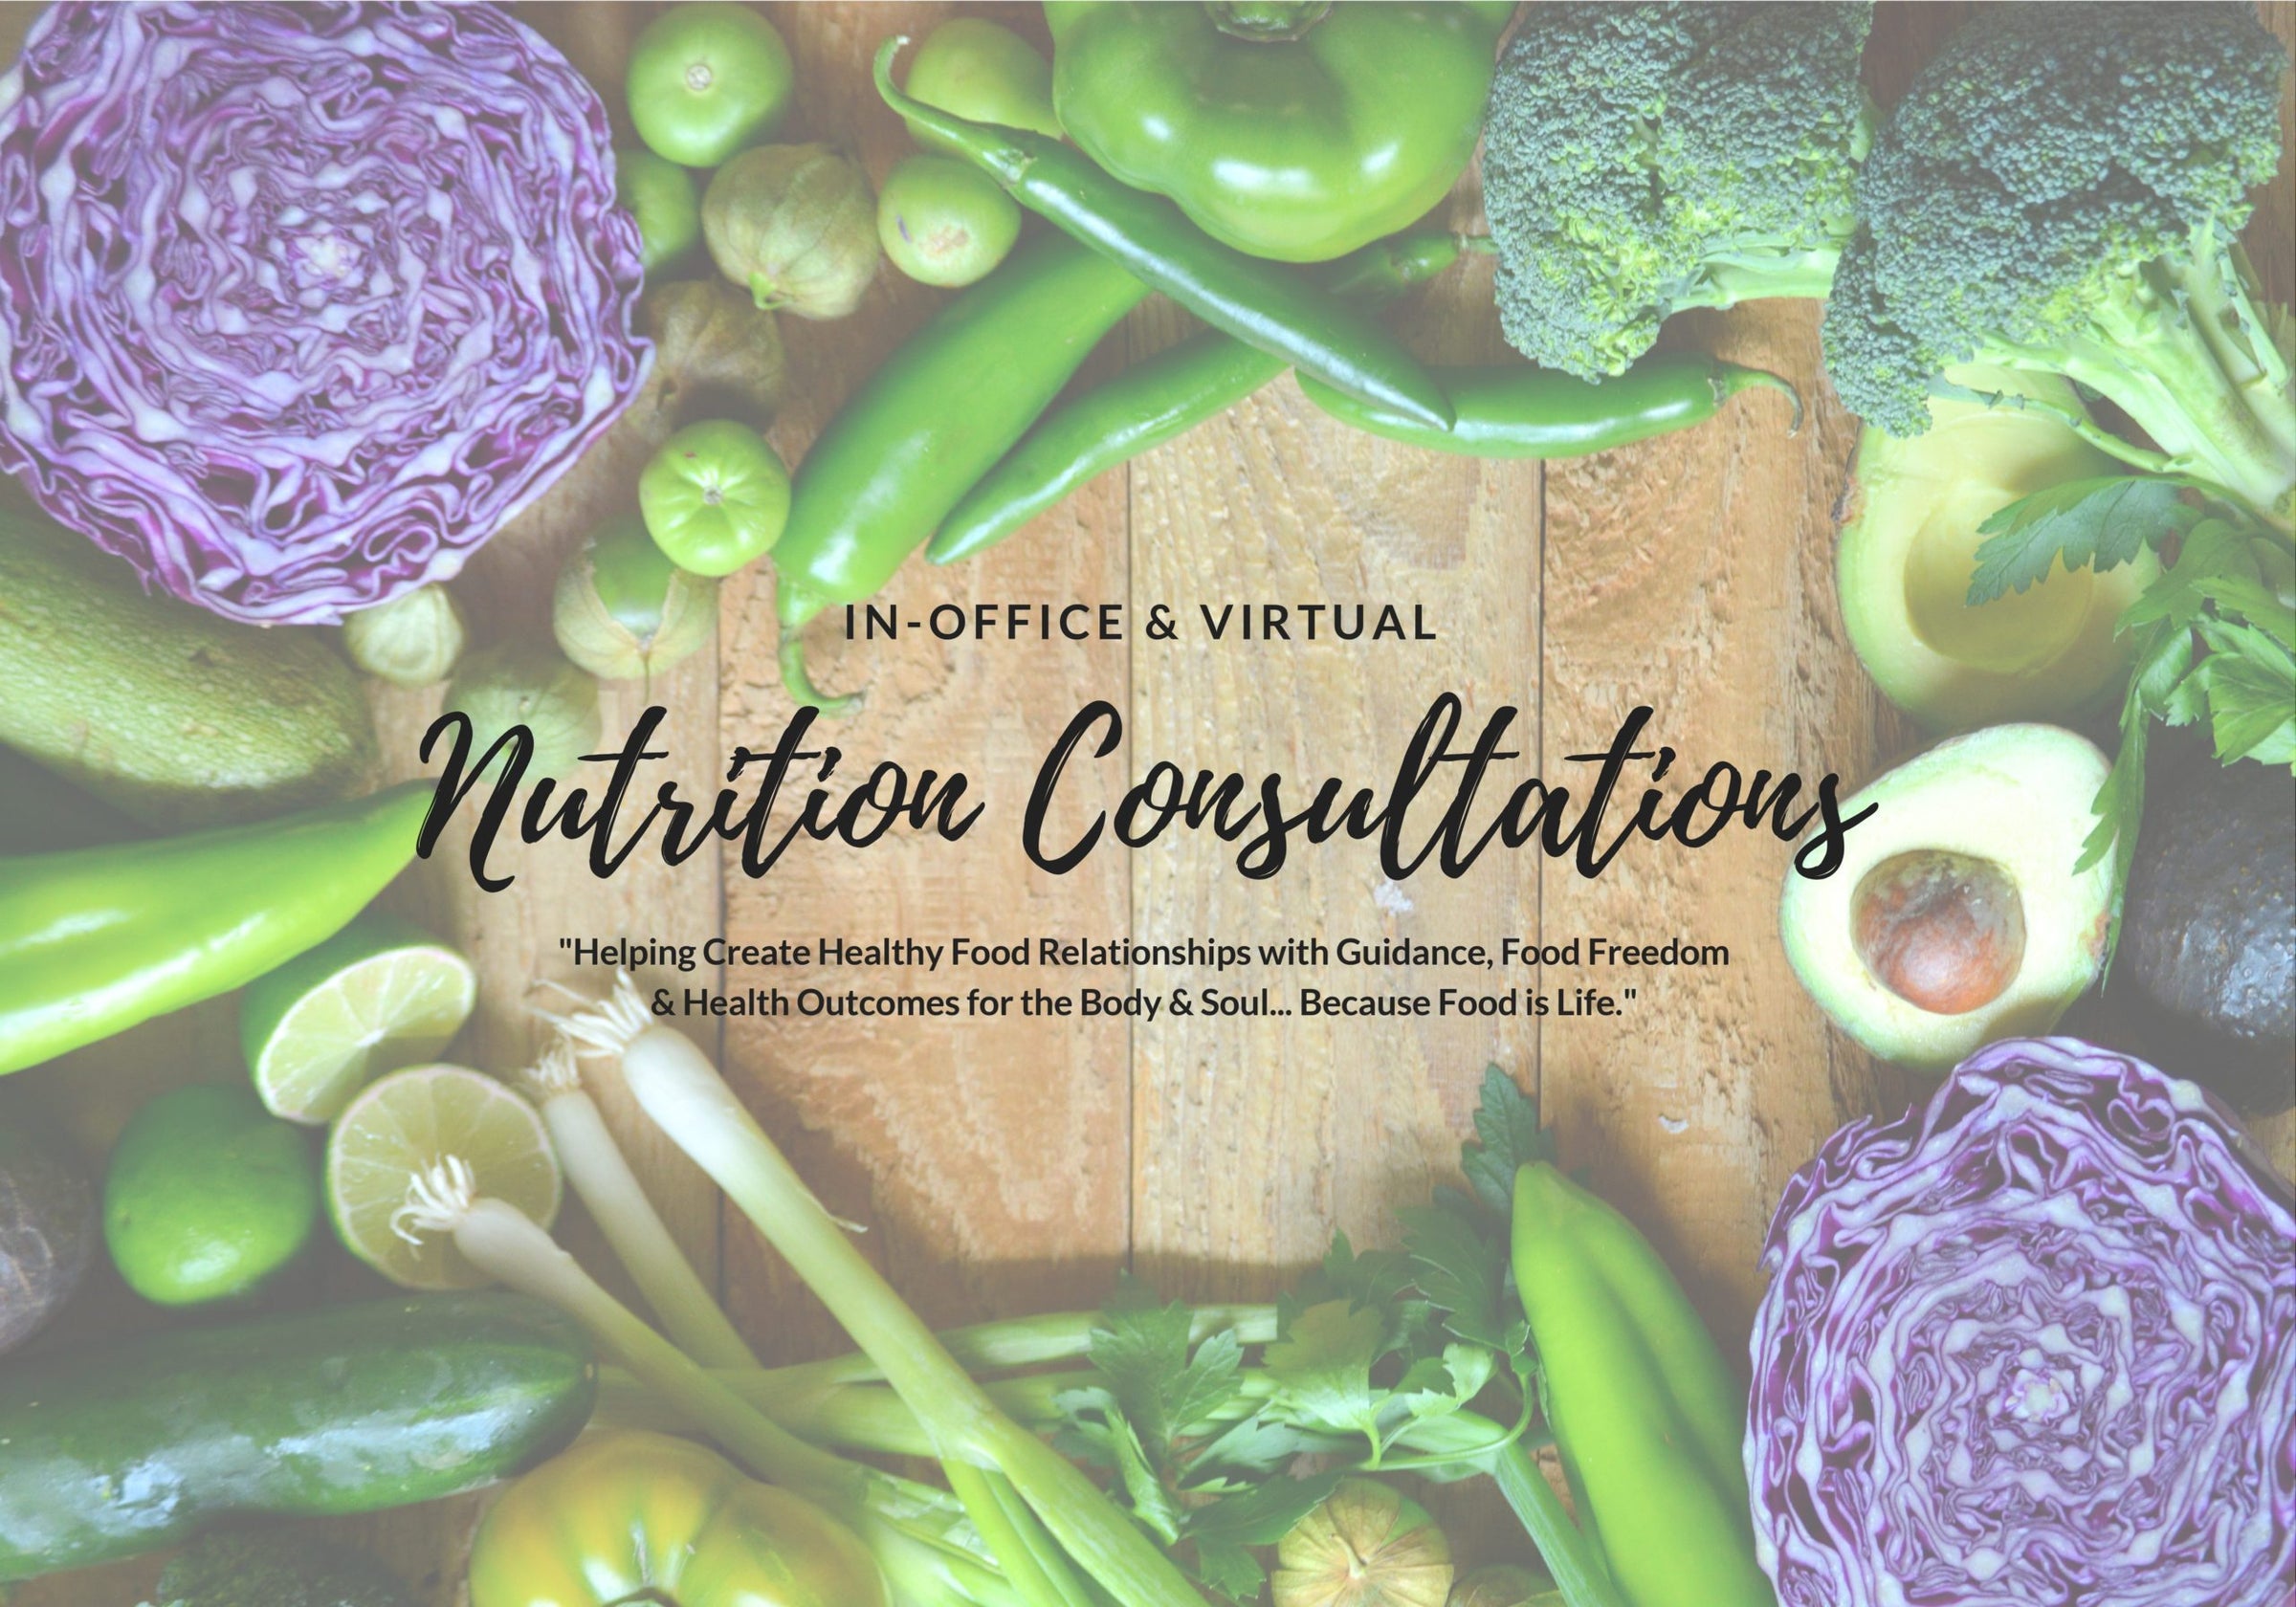 Sports nutrition consultations